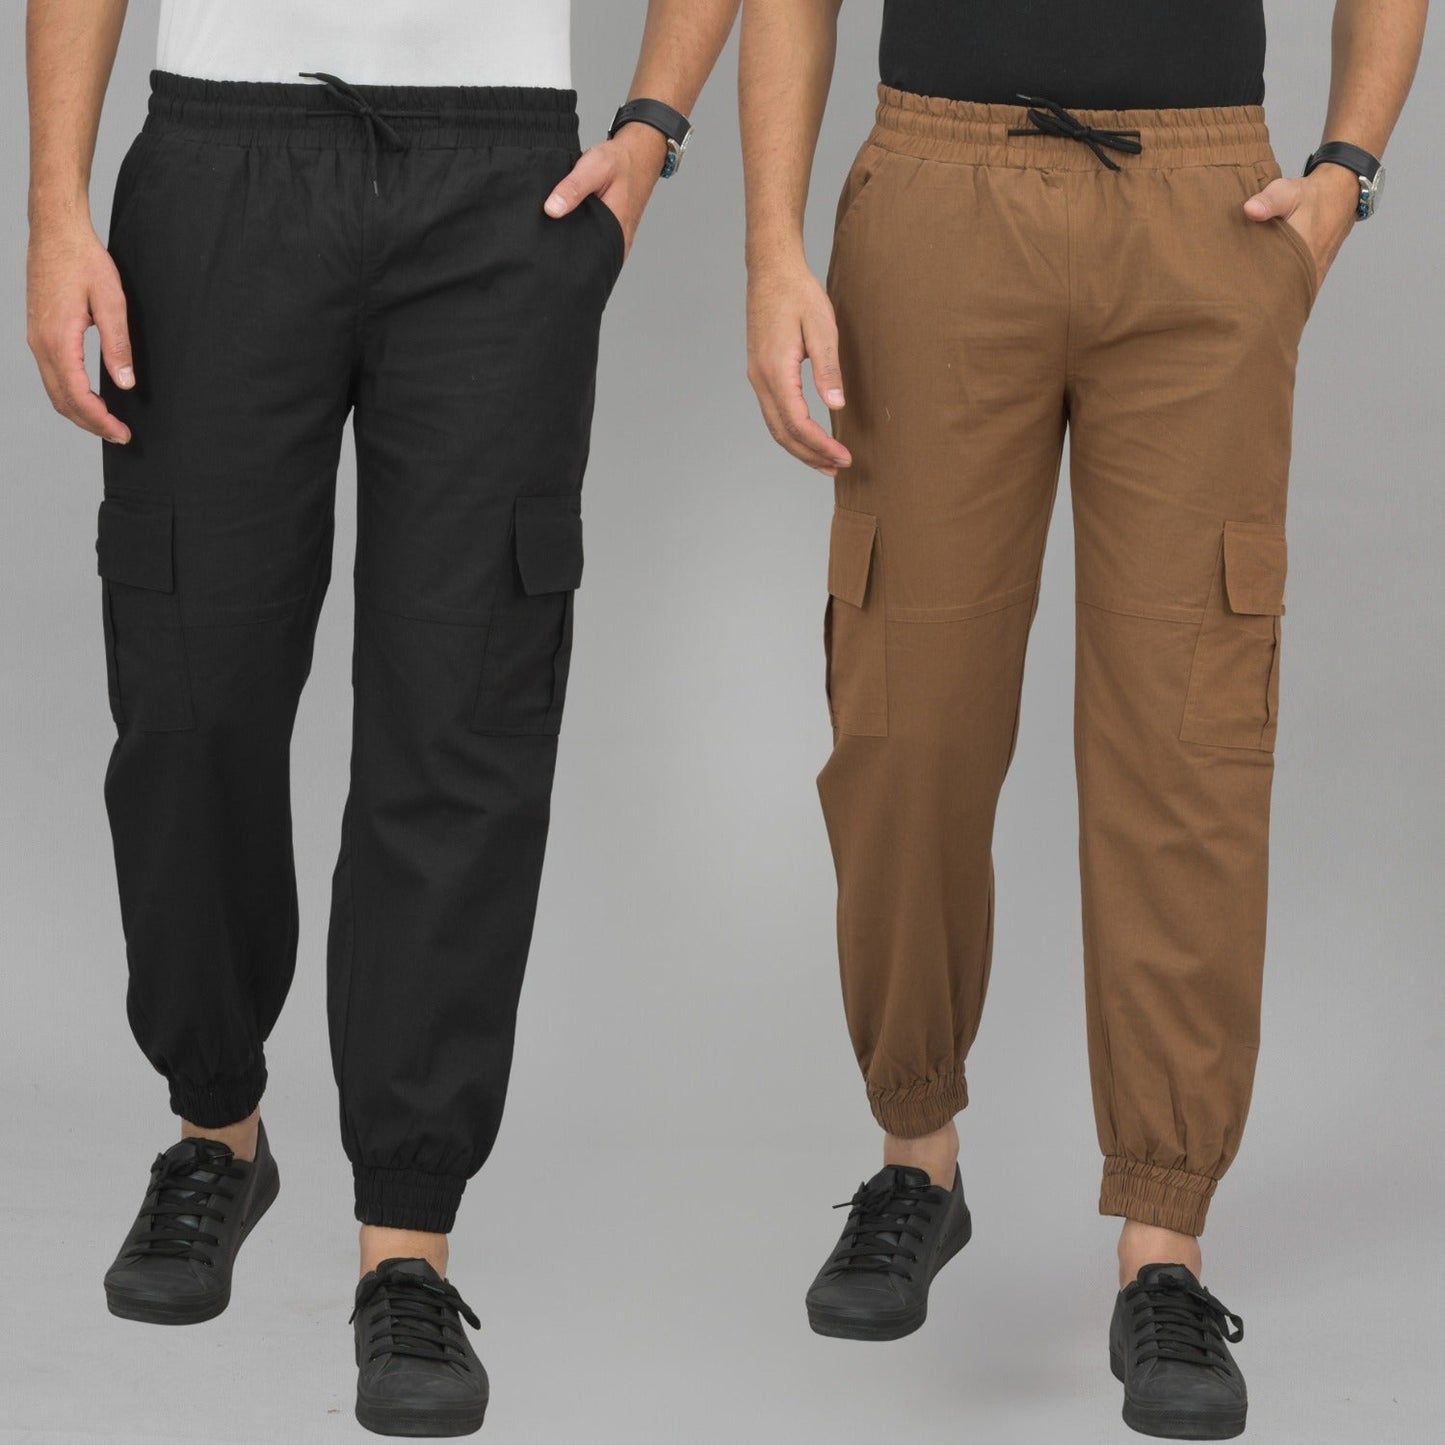 Combo Pack Of Mens Black And Brown Five Pocket Cotton Cargo Pants